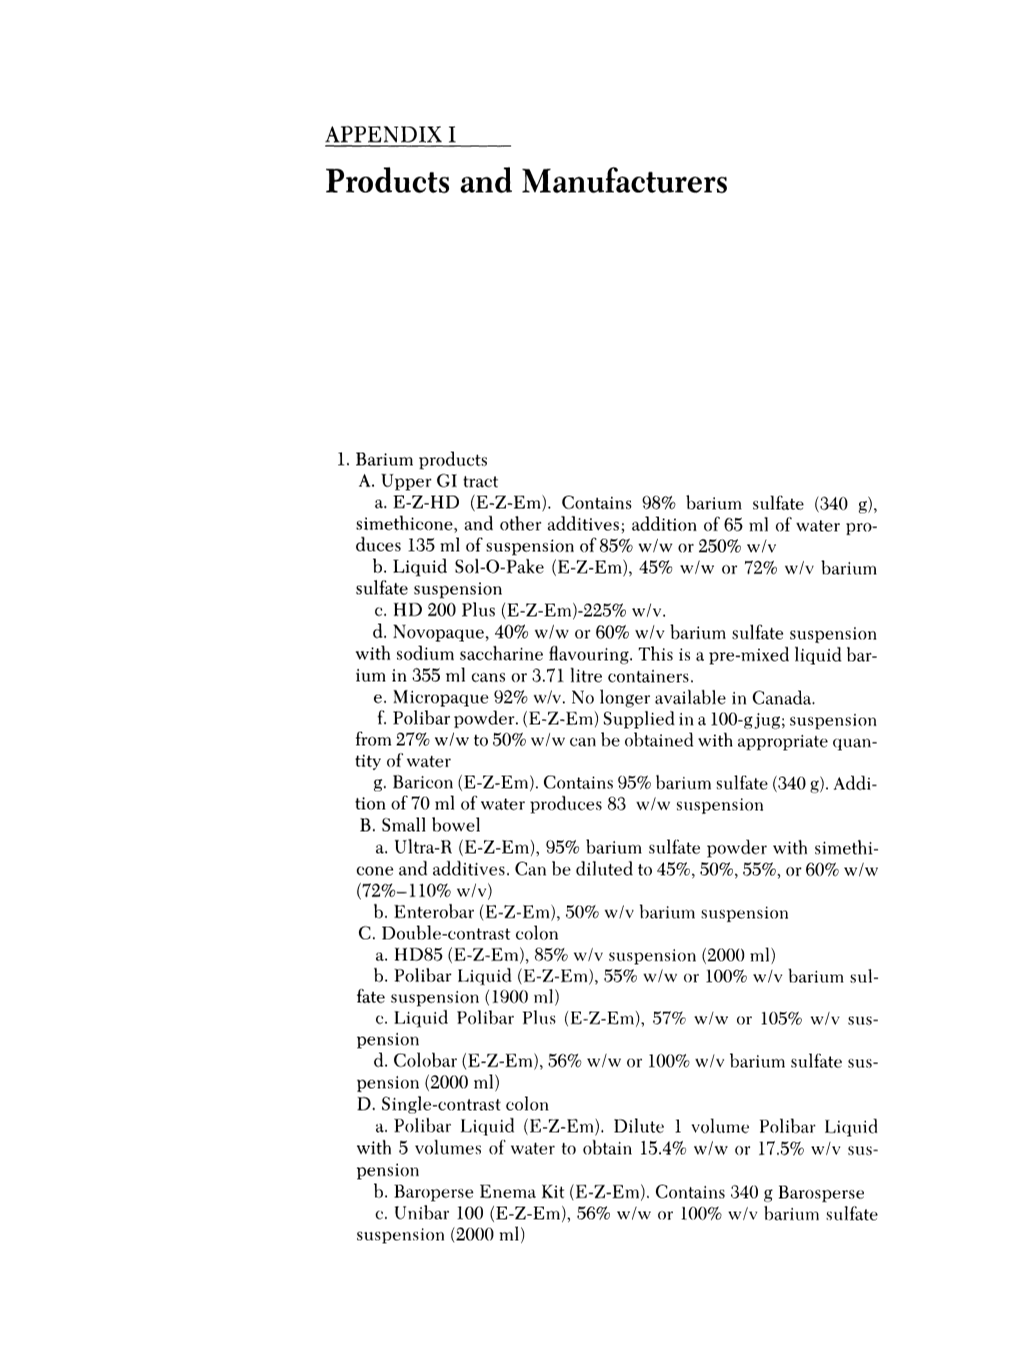 Products and Manufacturers